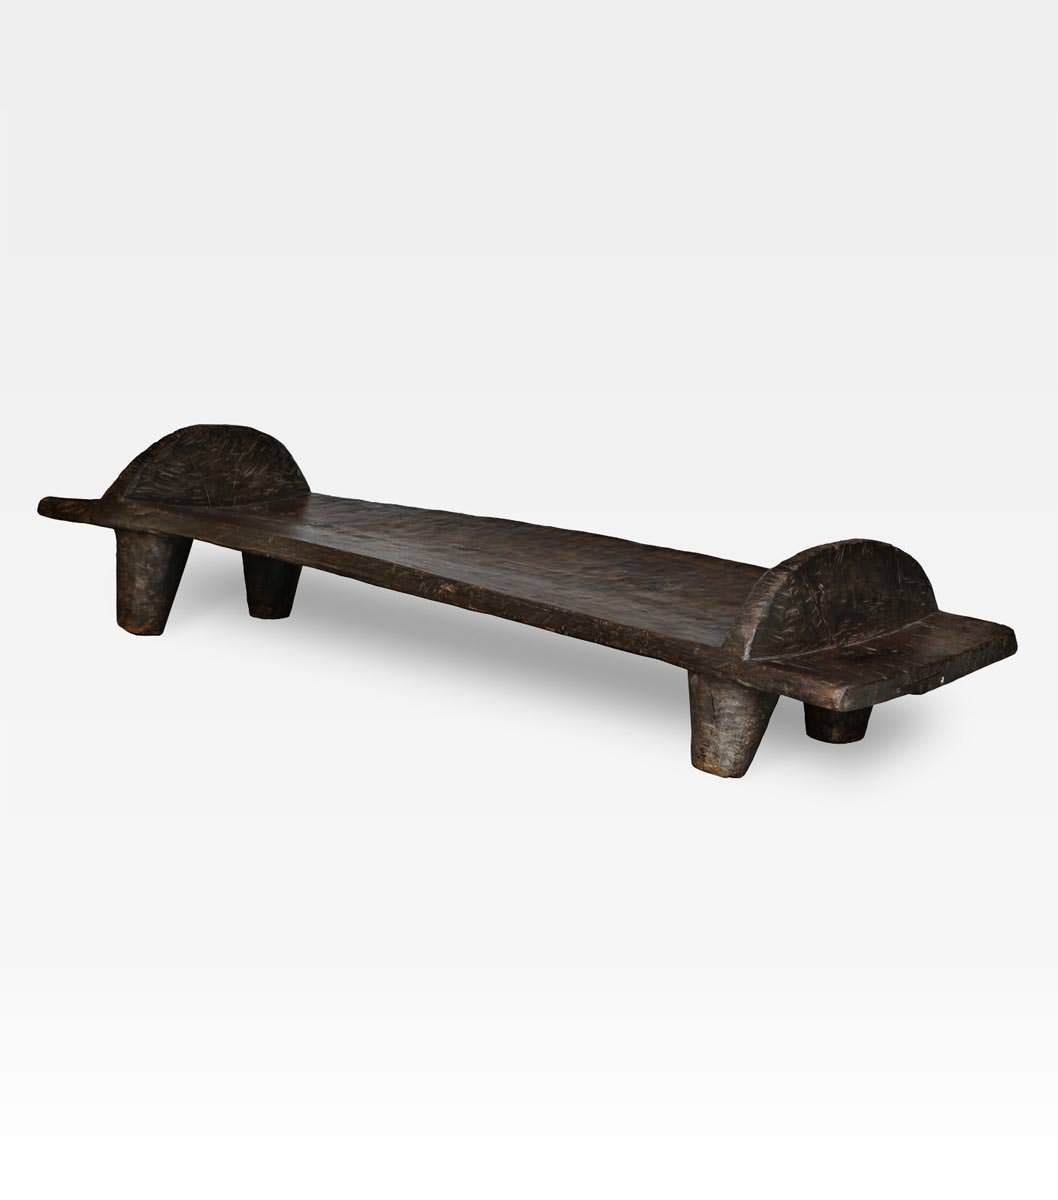 This beautiful bench was originally a bed used from Naga people. Carved from a teak bole, the dark color show the antiquity of wood. Today is perfect as a table o as a bench